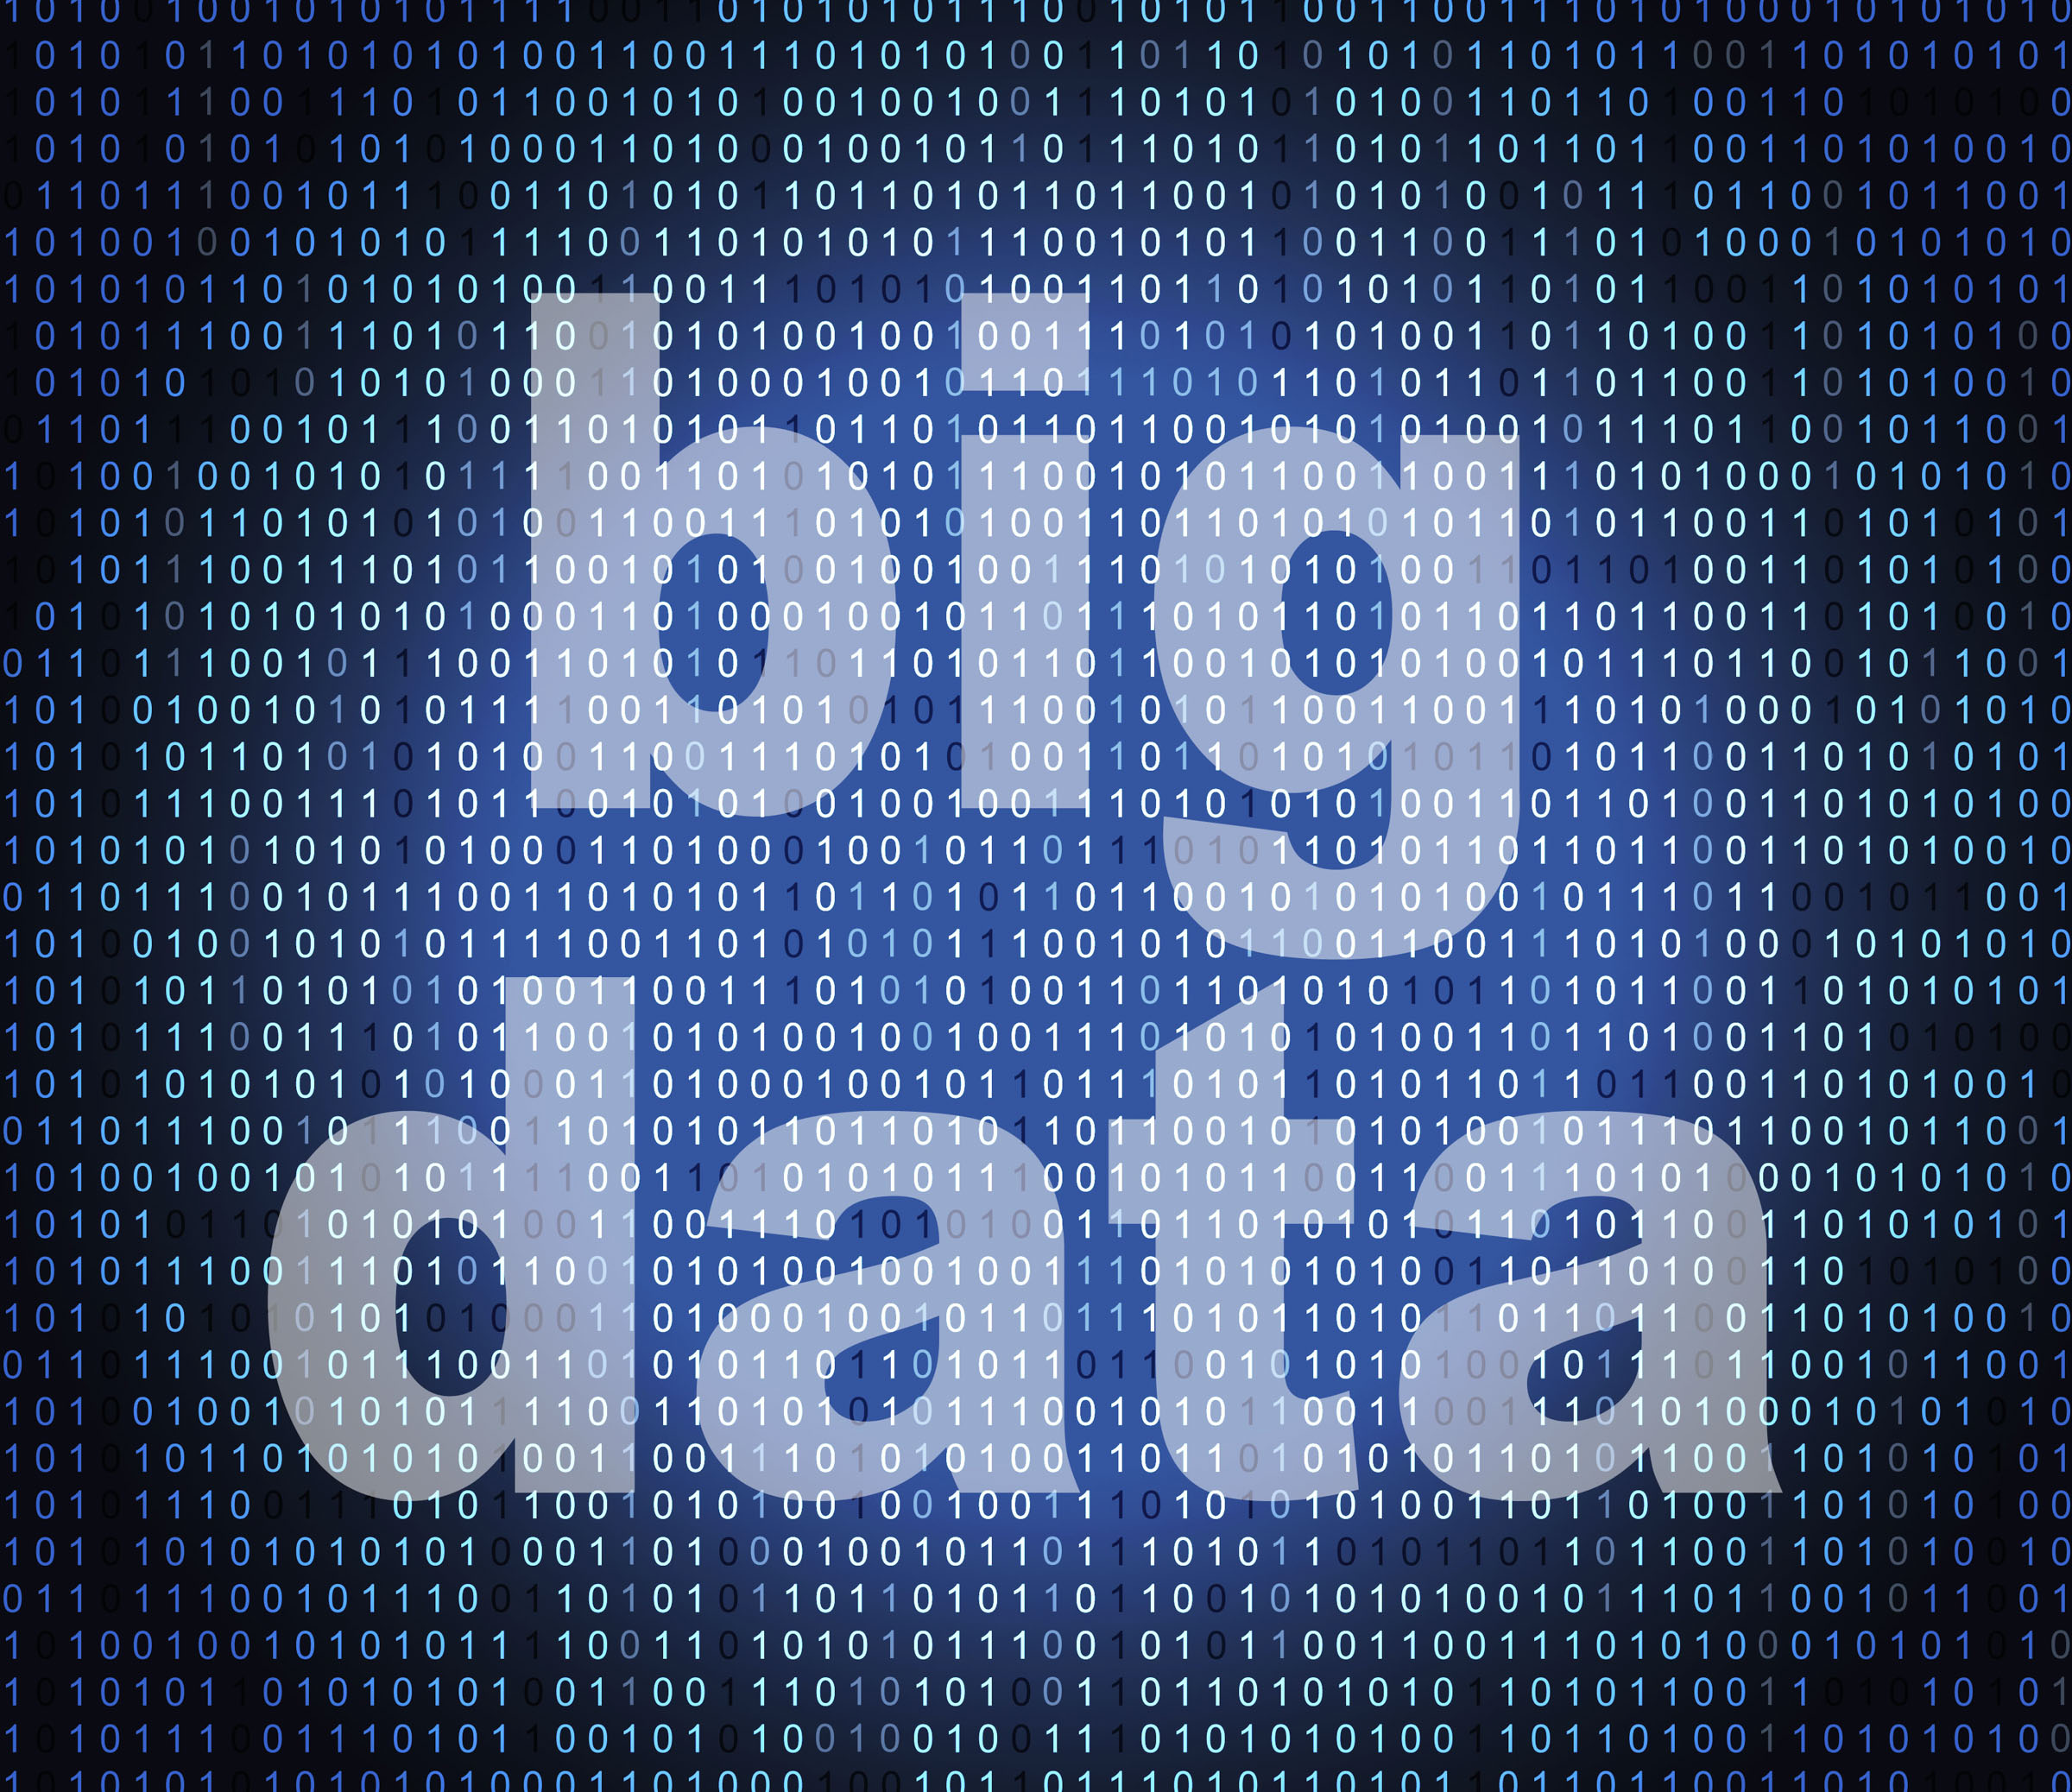 Big Data & Cloud Computing – Made for each other - Image 1